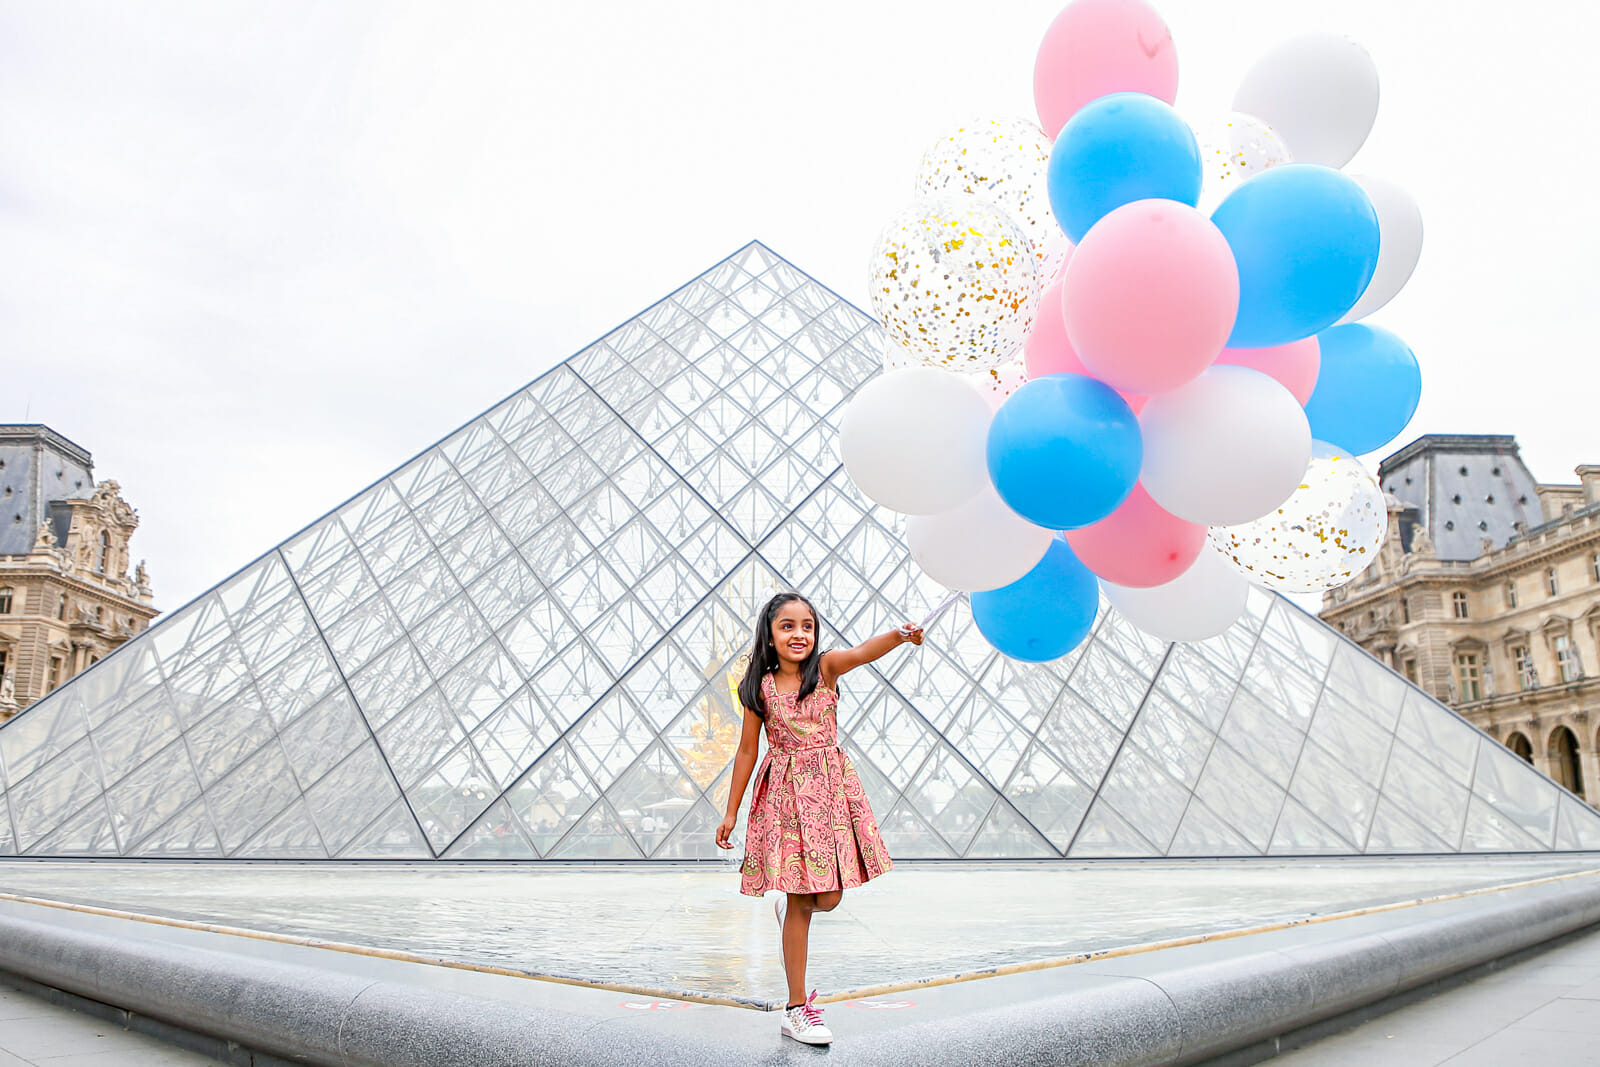 Solo portrait family photos at the Louvre Museum with pink, blue and white balloons